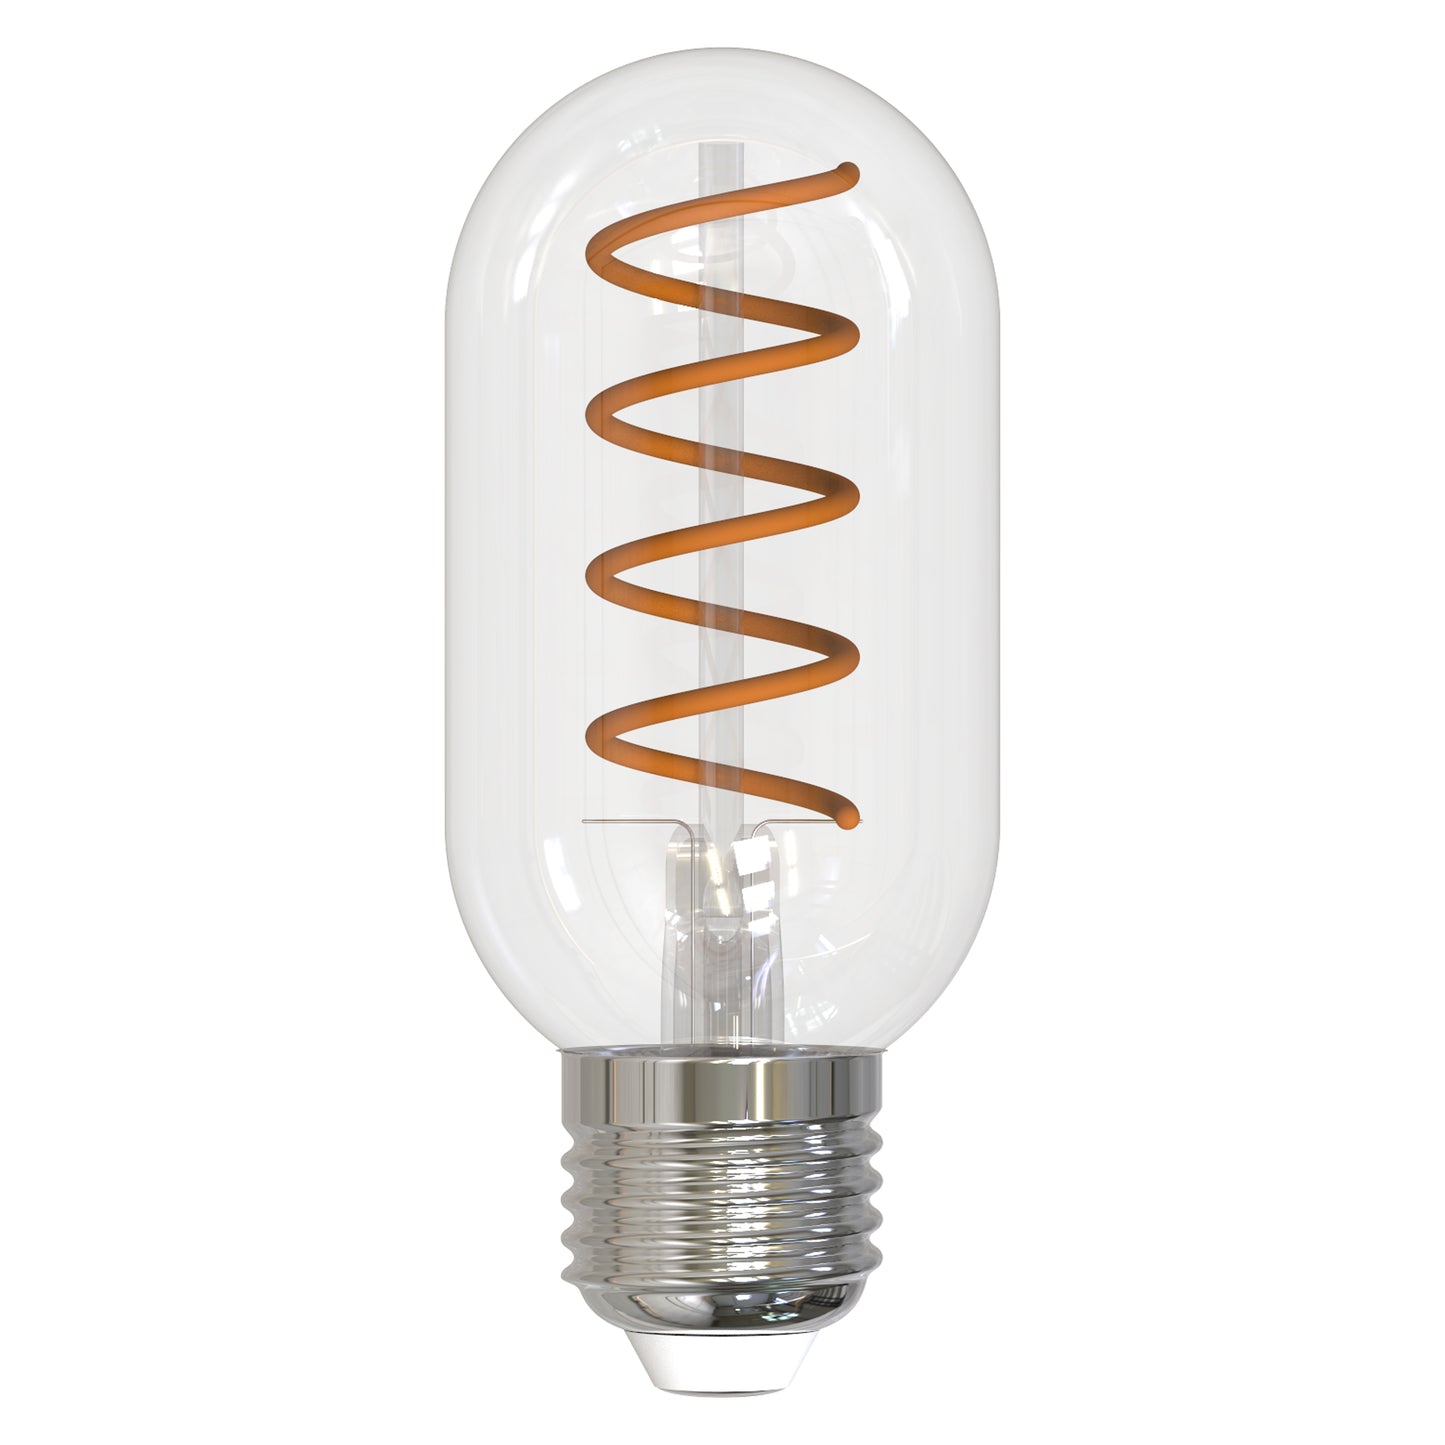 Bulbrite LED T14 Curved Filament Spiral, Dimmable E26 Medium Base, Clear Finish, 2100K-Amber Light 4 Watts